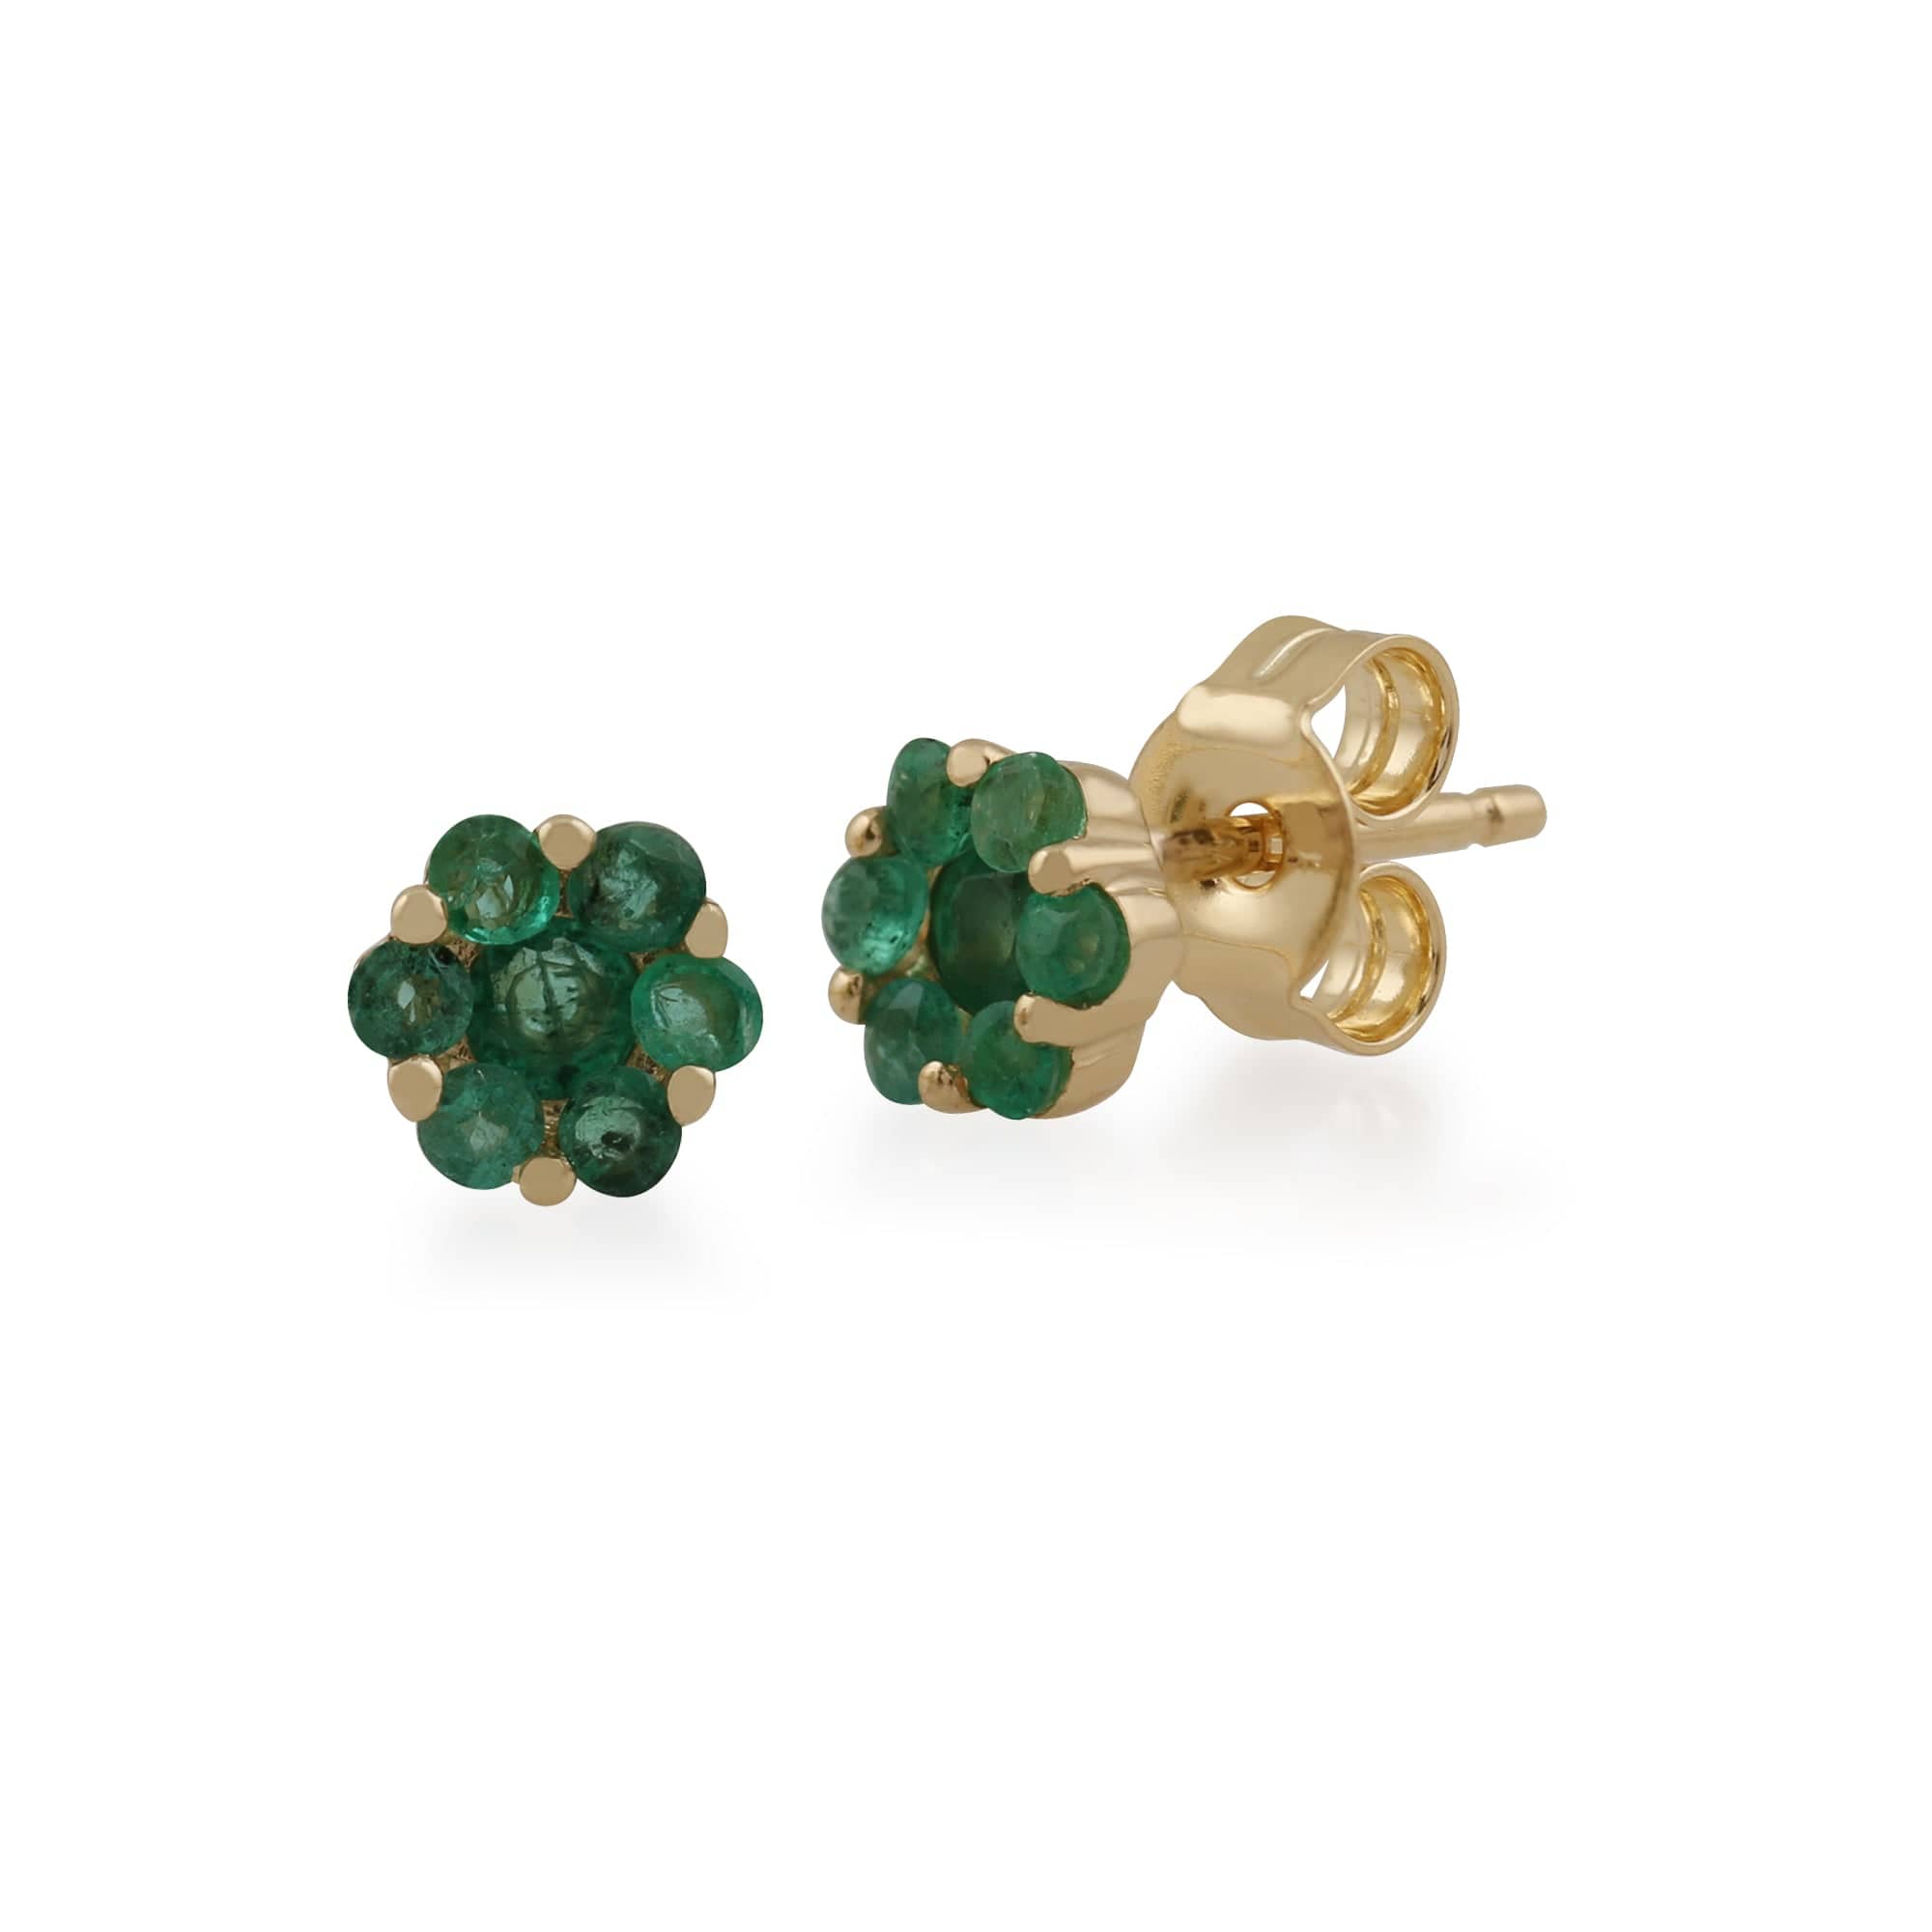 Floral Round Emerald Cluster Stud Earrings in 9ct Yellow Gold - Gemondo